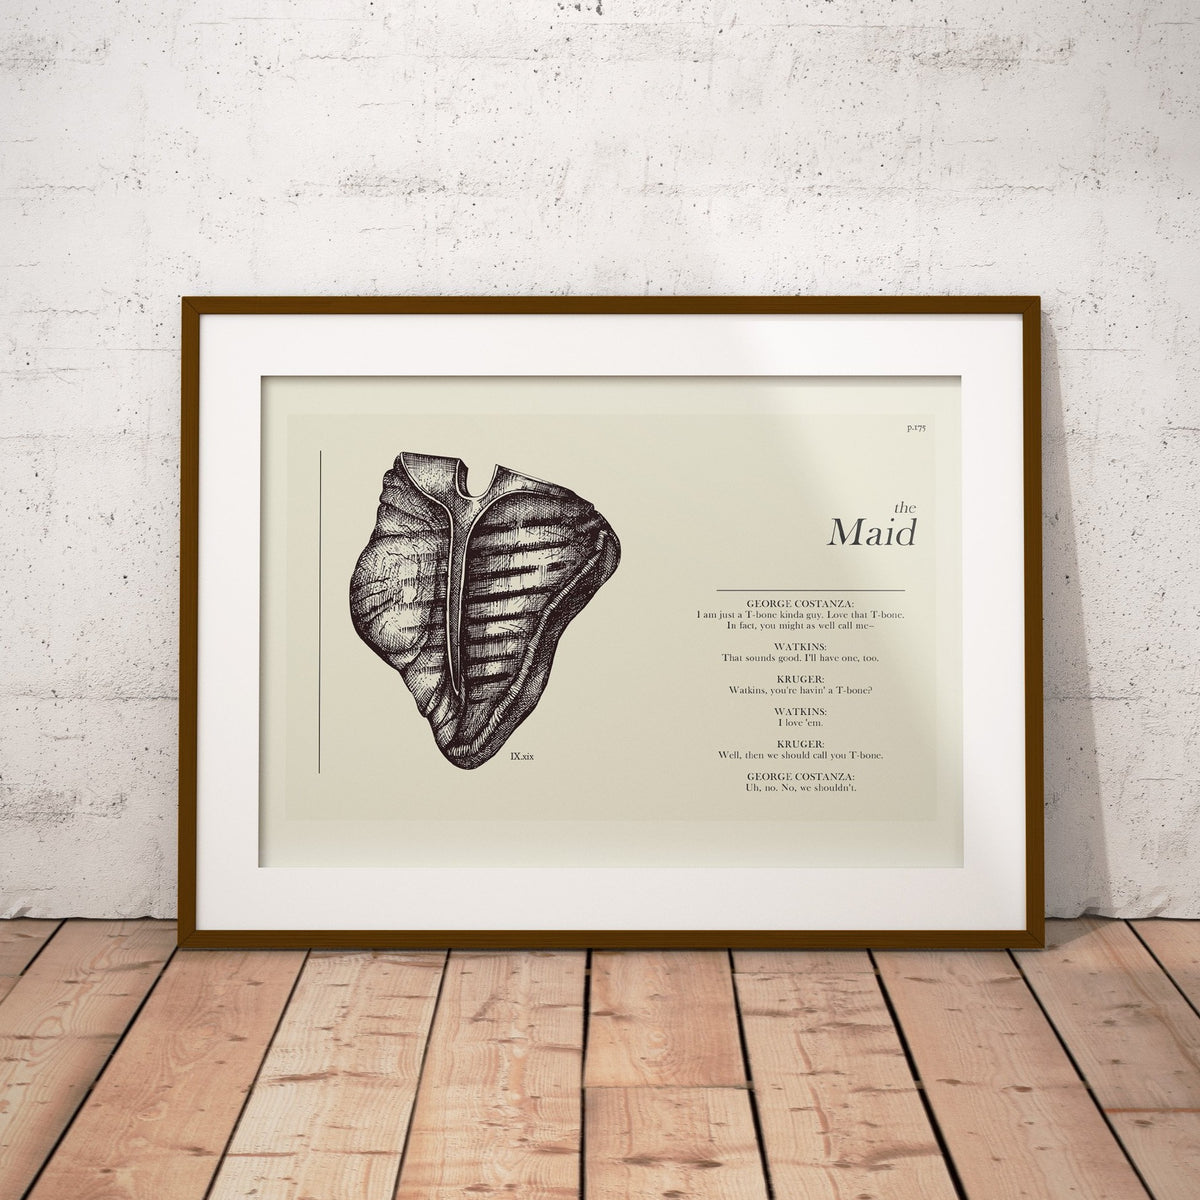 Seinfeld "The Maid" Schematic | 12"x18" or 18"x24" Print only